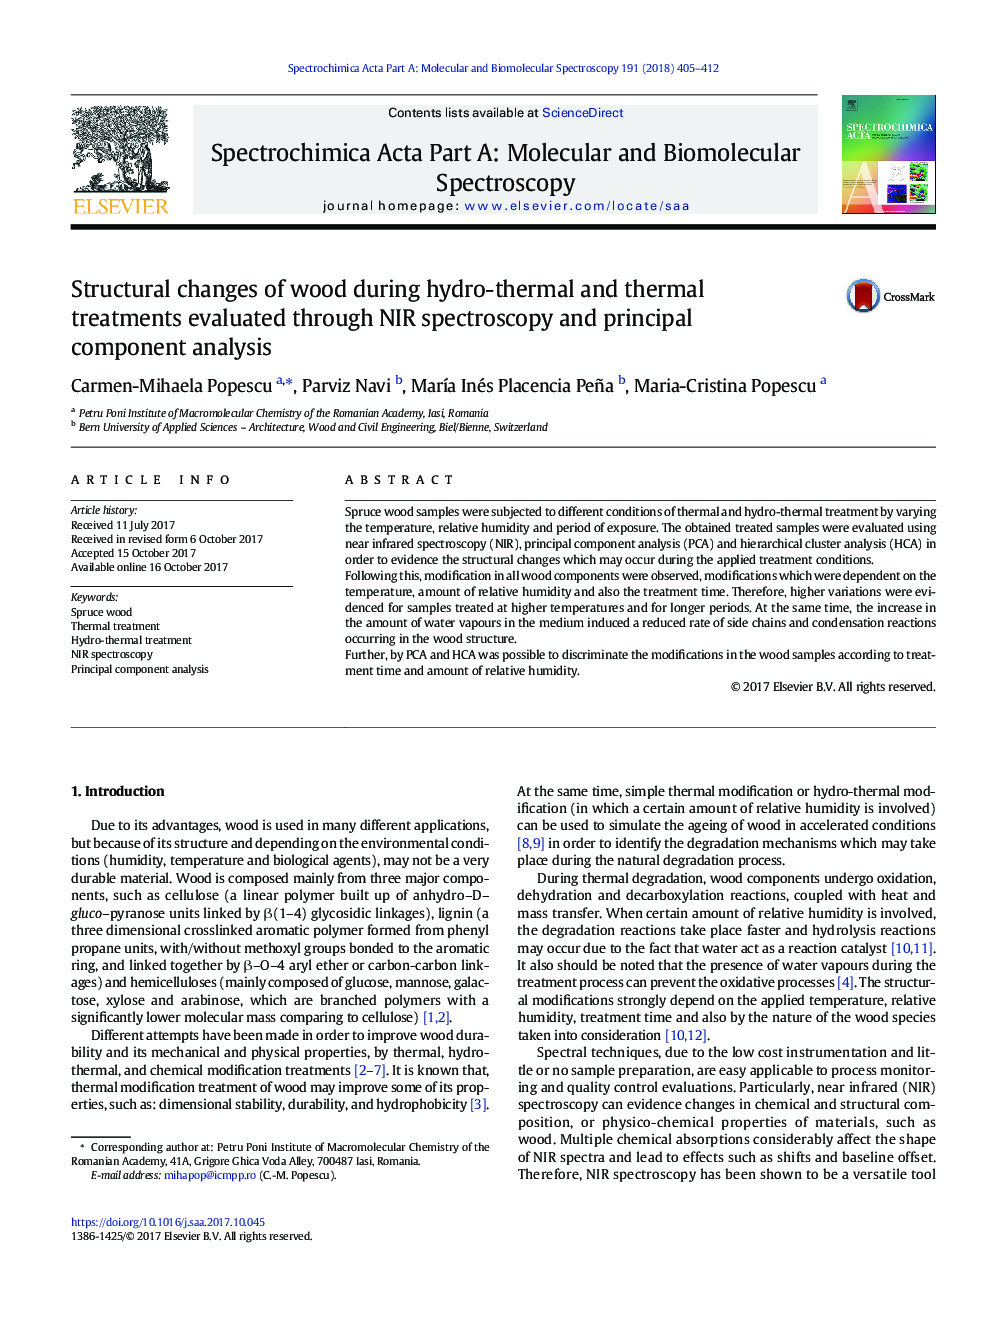 Structural changes of wood during hydro-thermal and thermal treatments evaluated through NIR spectroscopy and principal component analysis